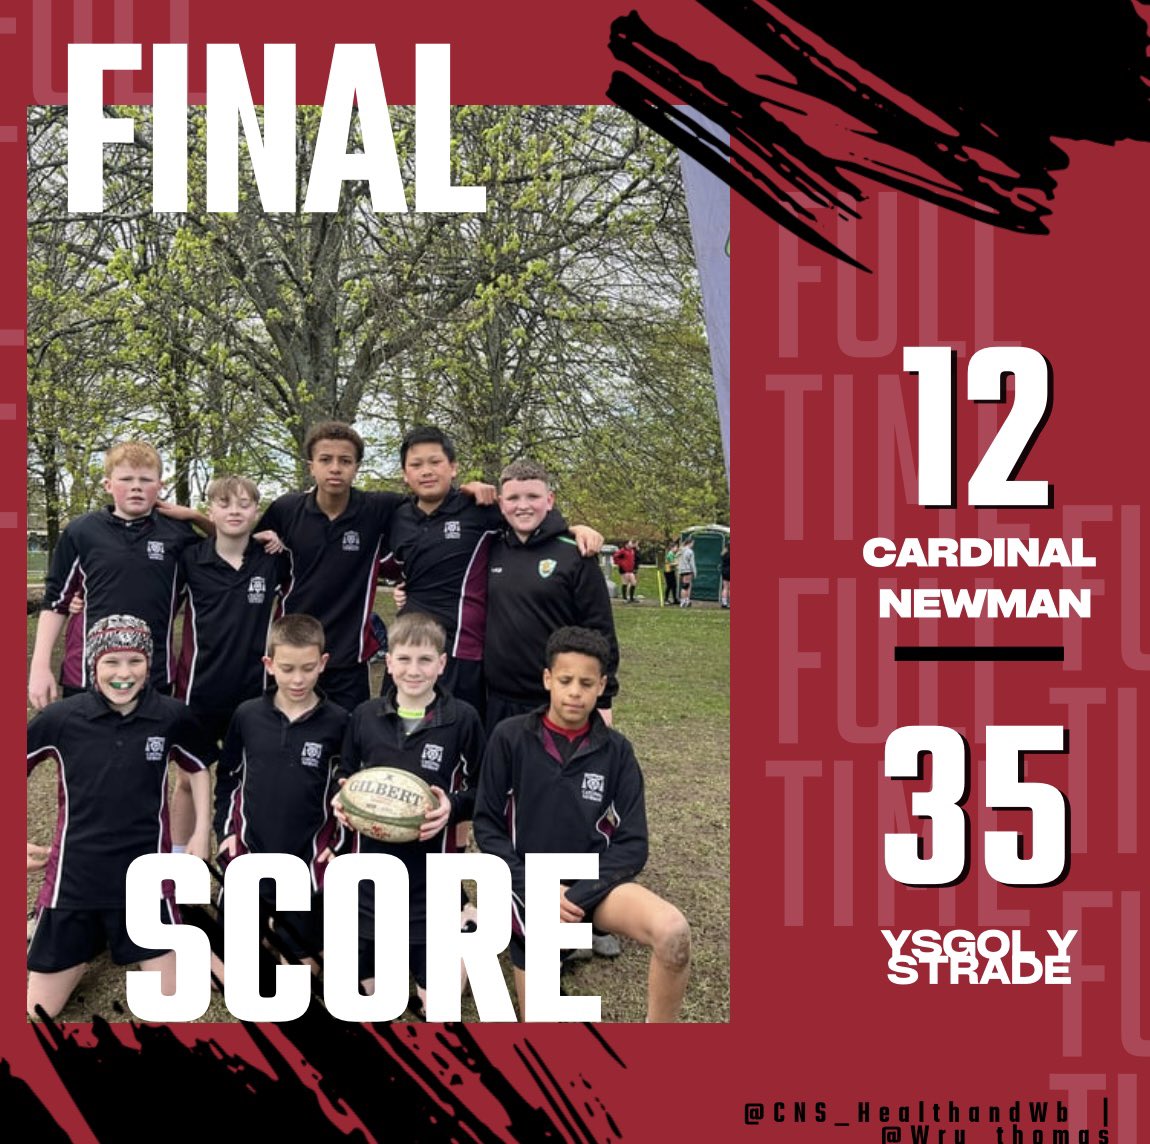 Boys put in a great shift but fell short against a well organised Strade side. @WRU_Thomas @CNSRCT @CnsYear7